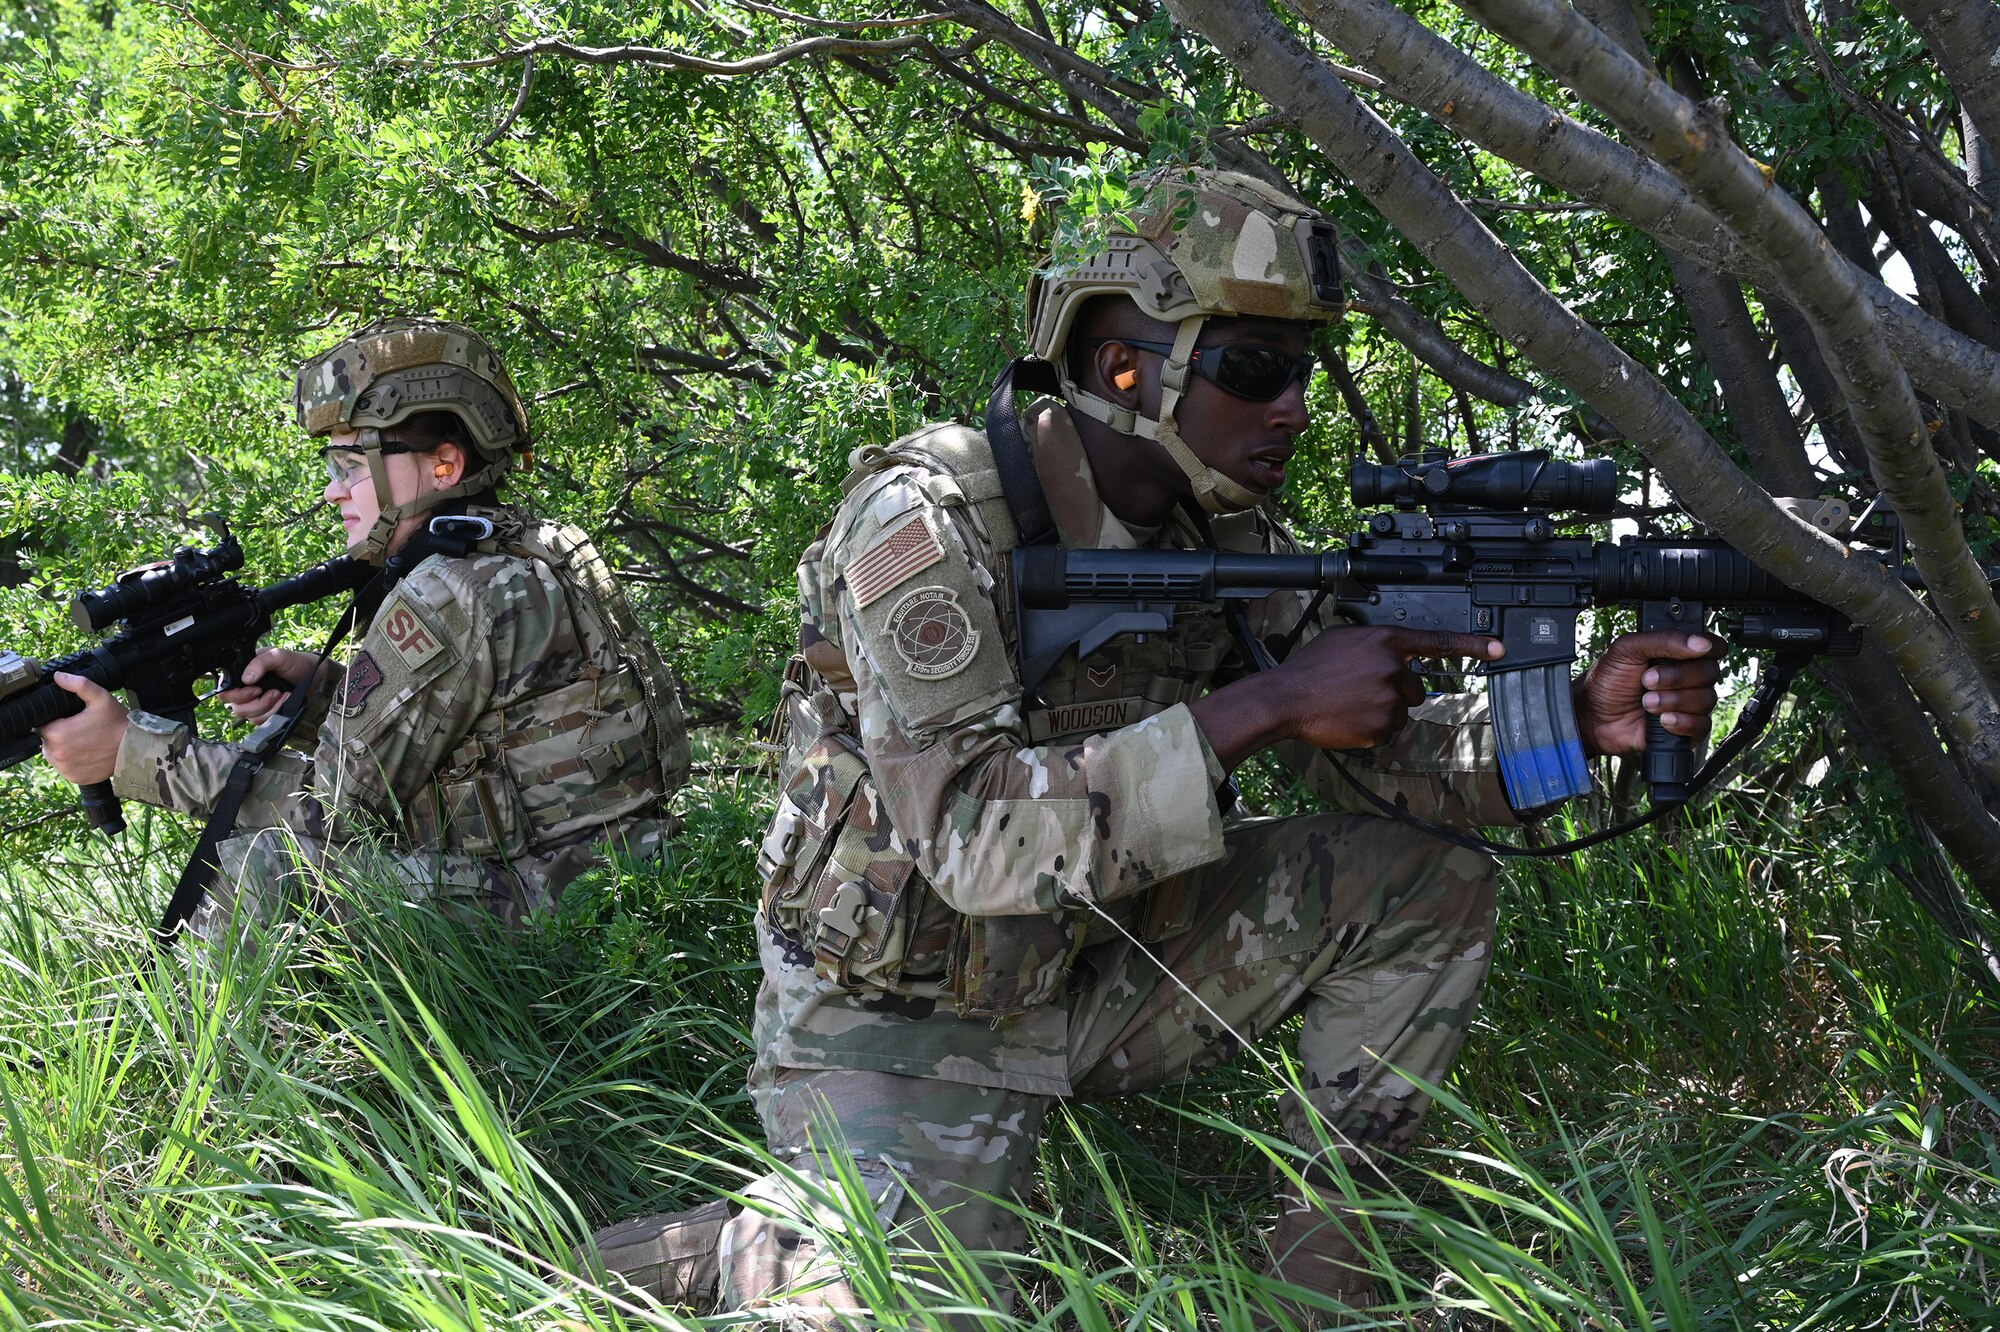 Two North Dakota Air National Guard members of the 219th Security Forces Squadron in uniform crouch near some bushes with training M4 rifles during a training exercise at the Minot Air Force Base, N.D., June 24, 2021.